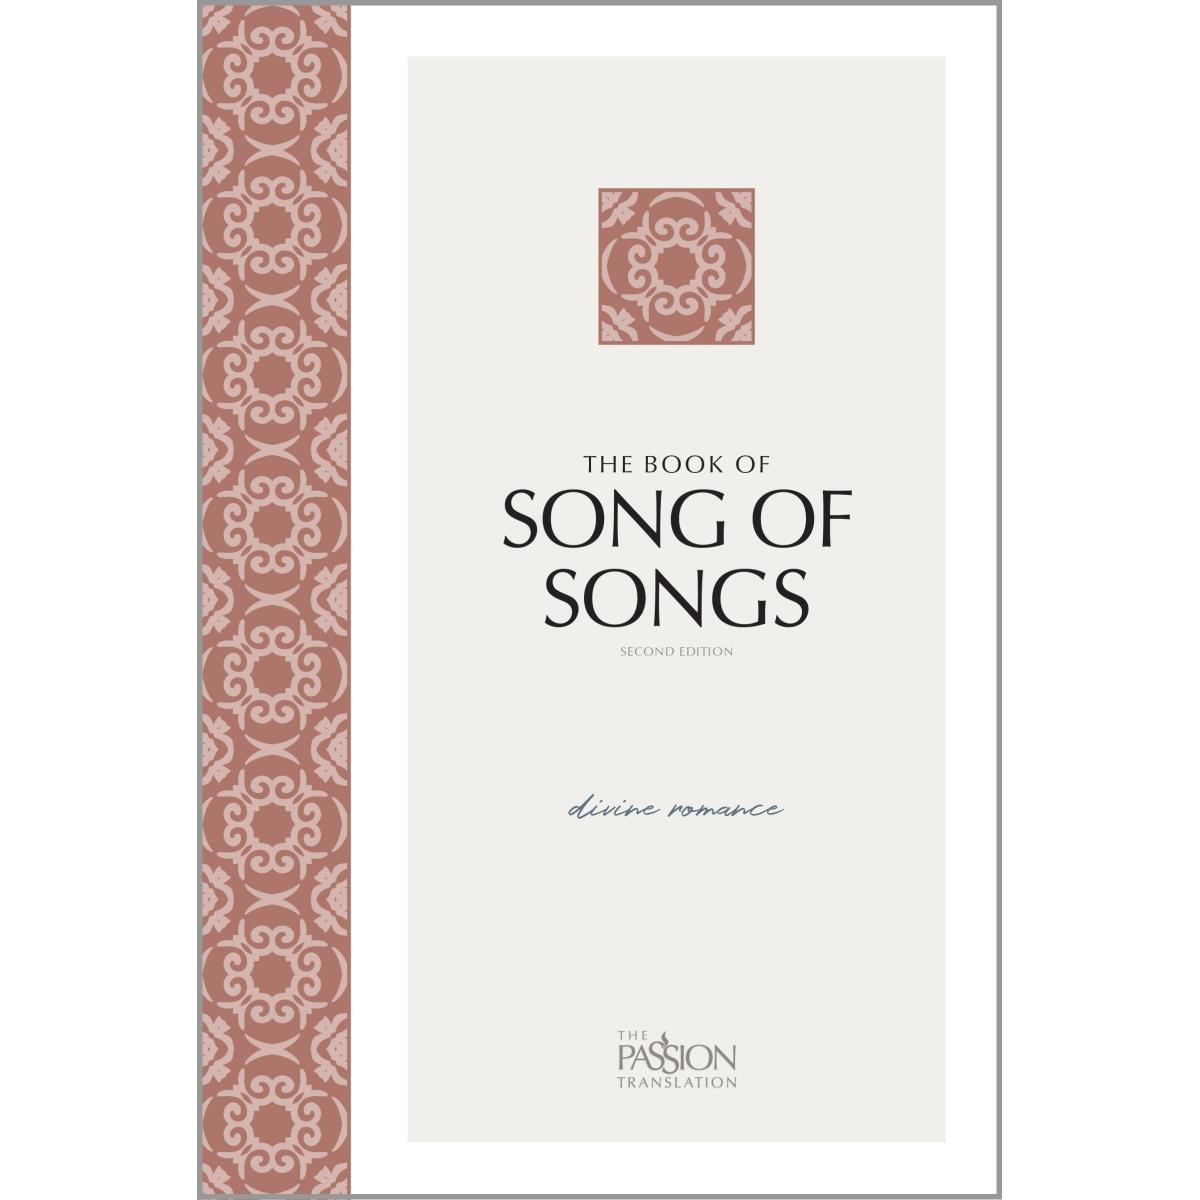 153926 The Passion Translation The Book Of Song Of Songs - 2nd Edition